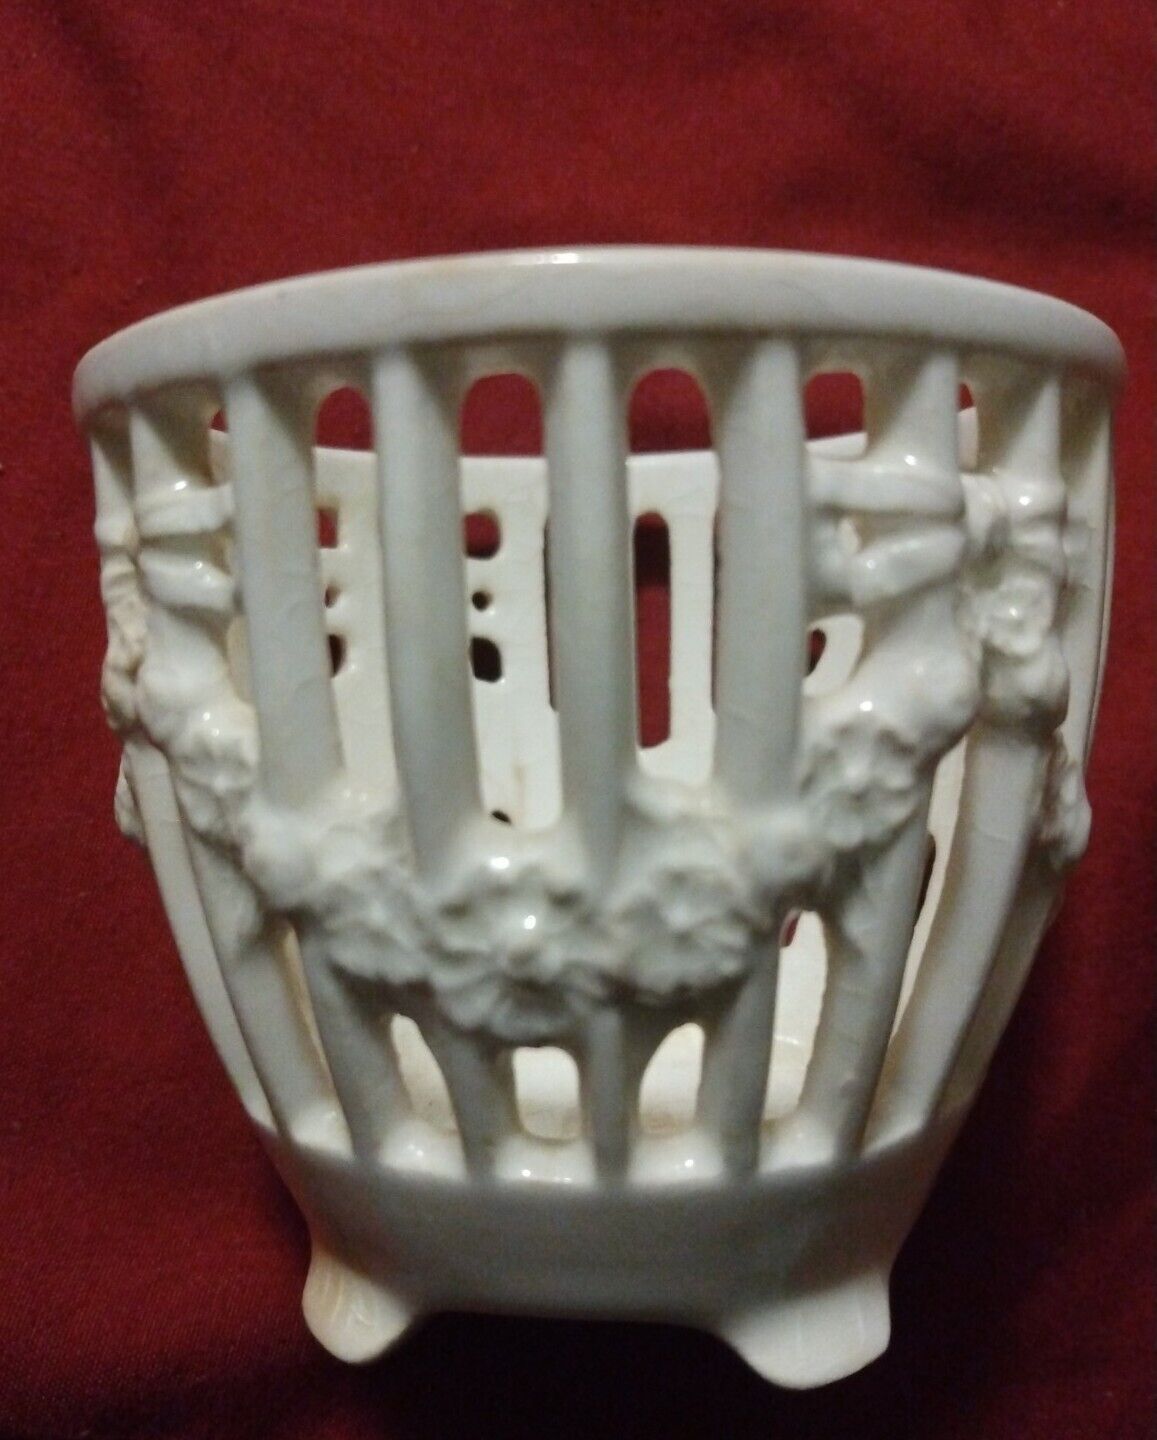  Small Antique  Germany Openwork Porcelain # 4213 Max Rosler